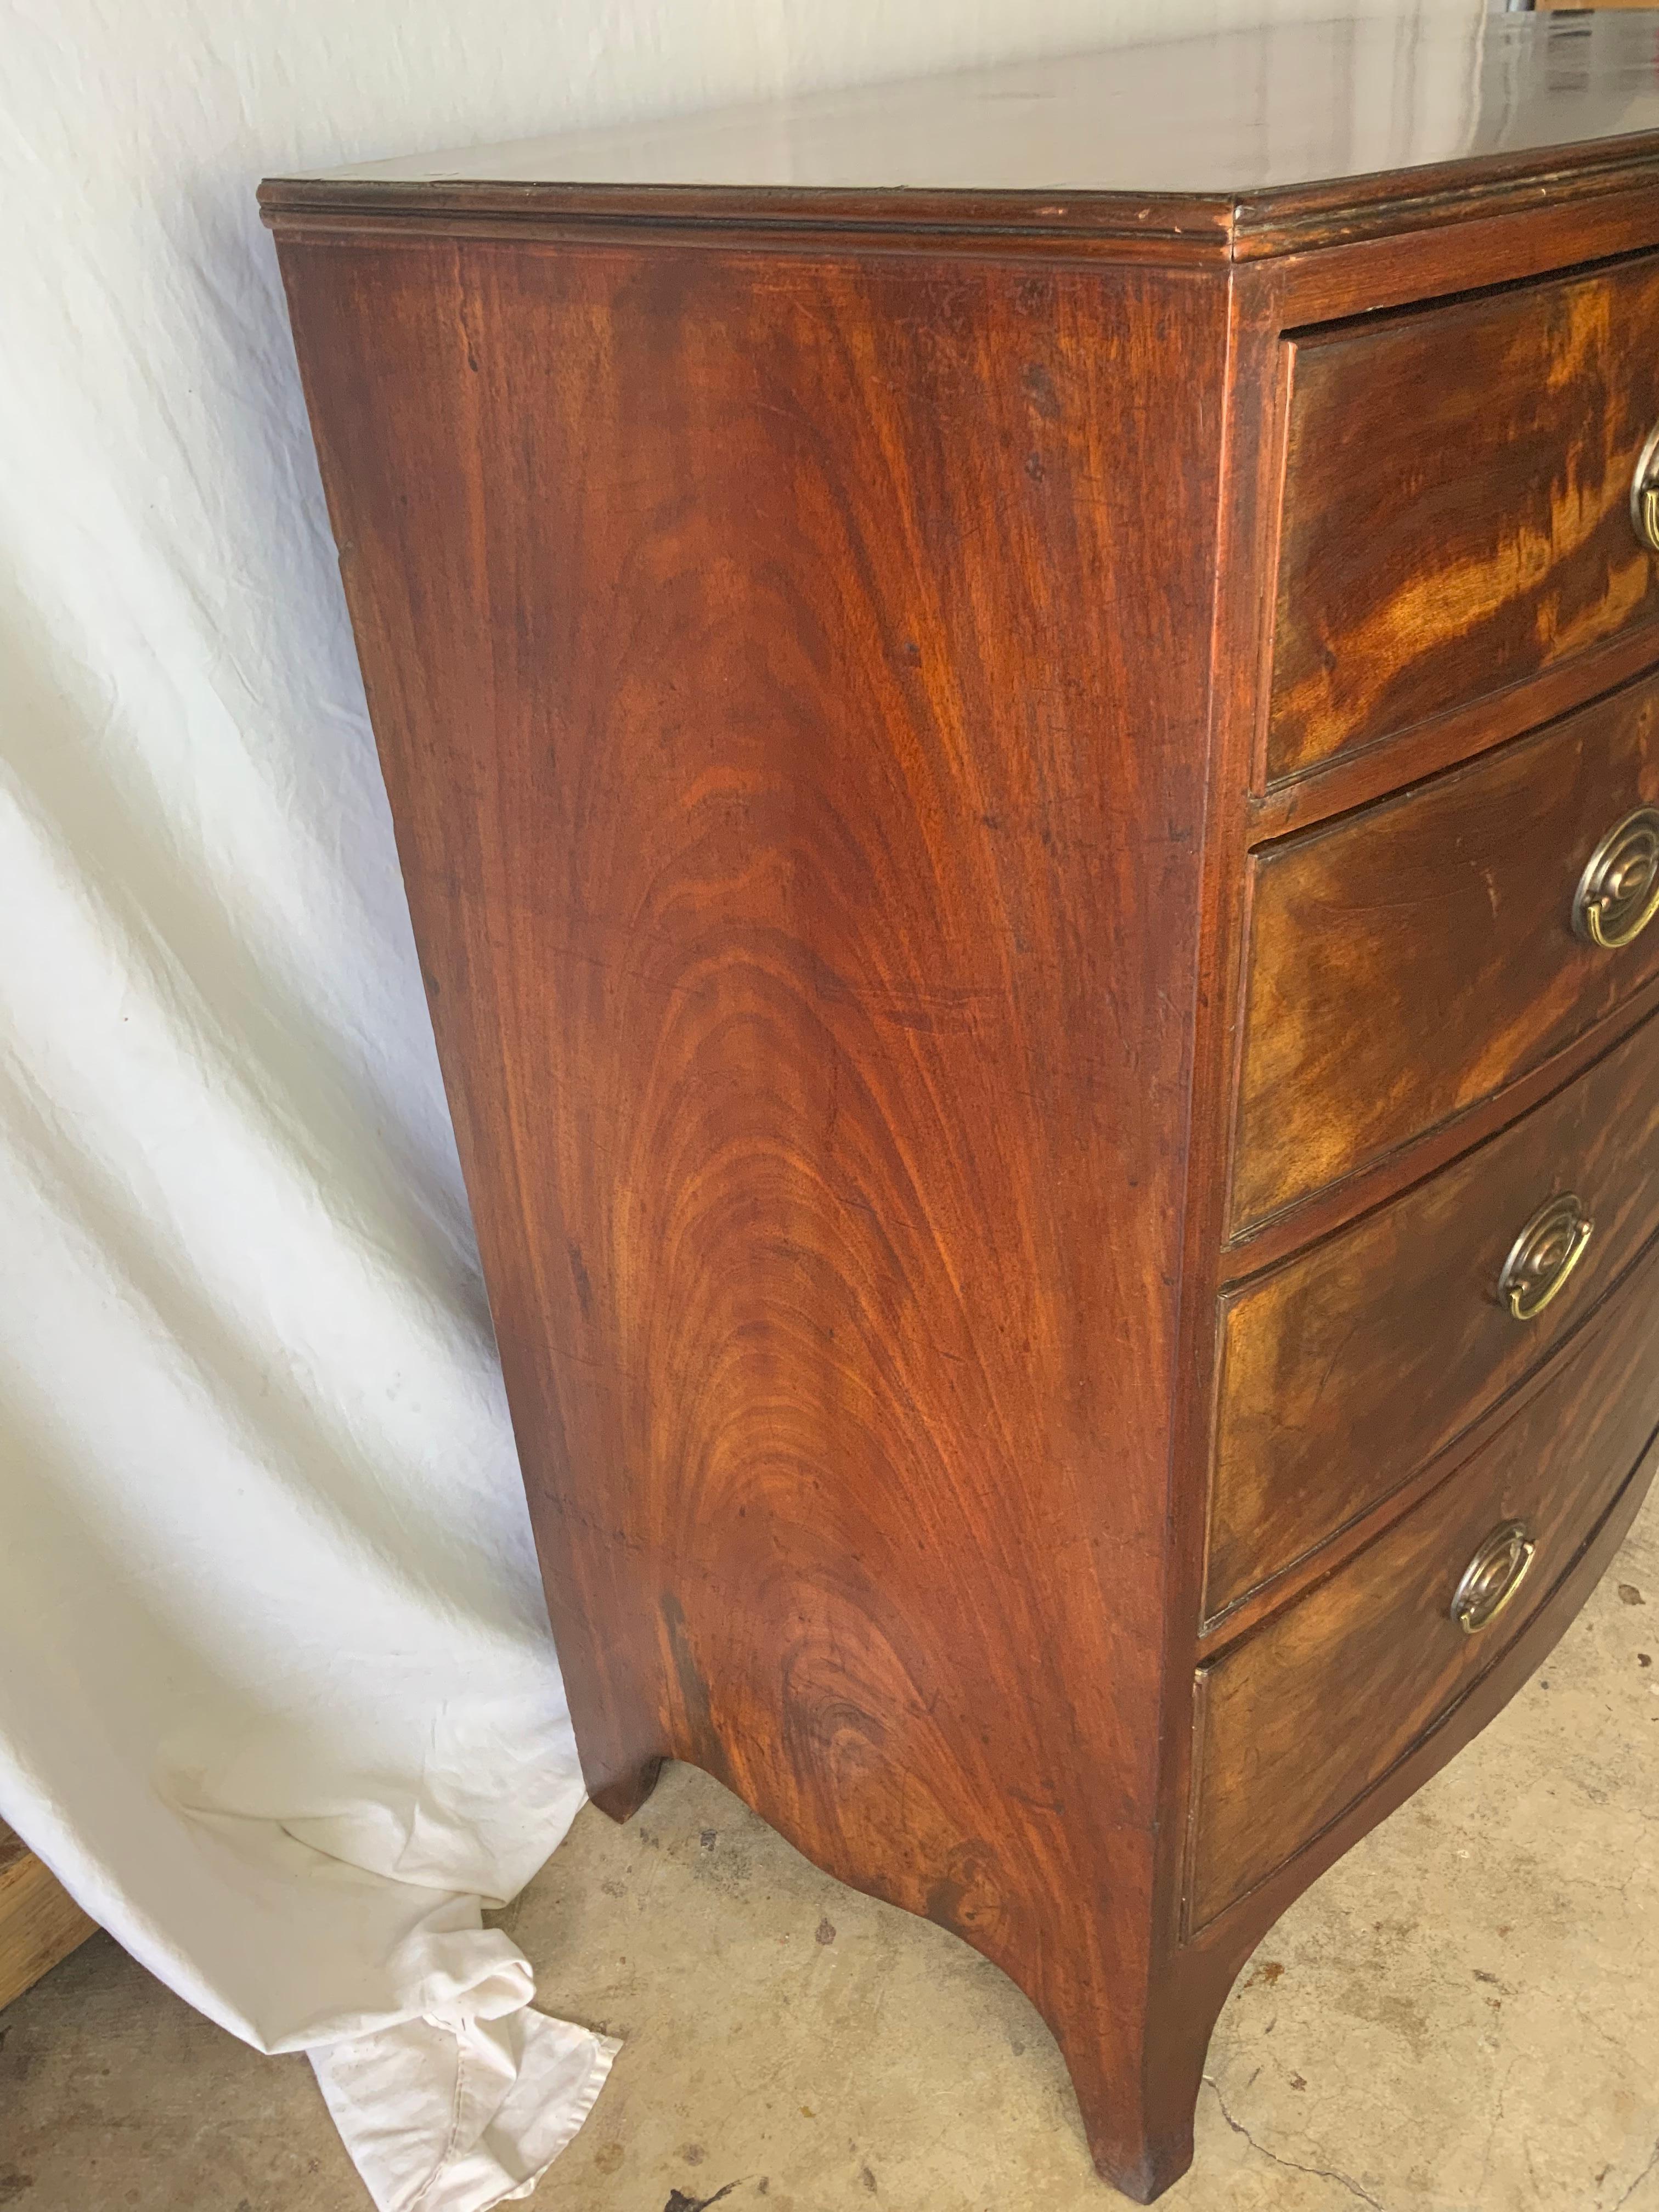 A very nice tall two over three Georgian Mahogany Bow Front Bureau sitting on tall French feet constructed out of highly figured Mahogany. This piece still retains its original surface showing a great color and a nicely aged patina. Secondary wood